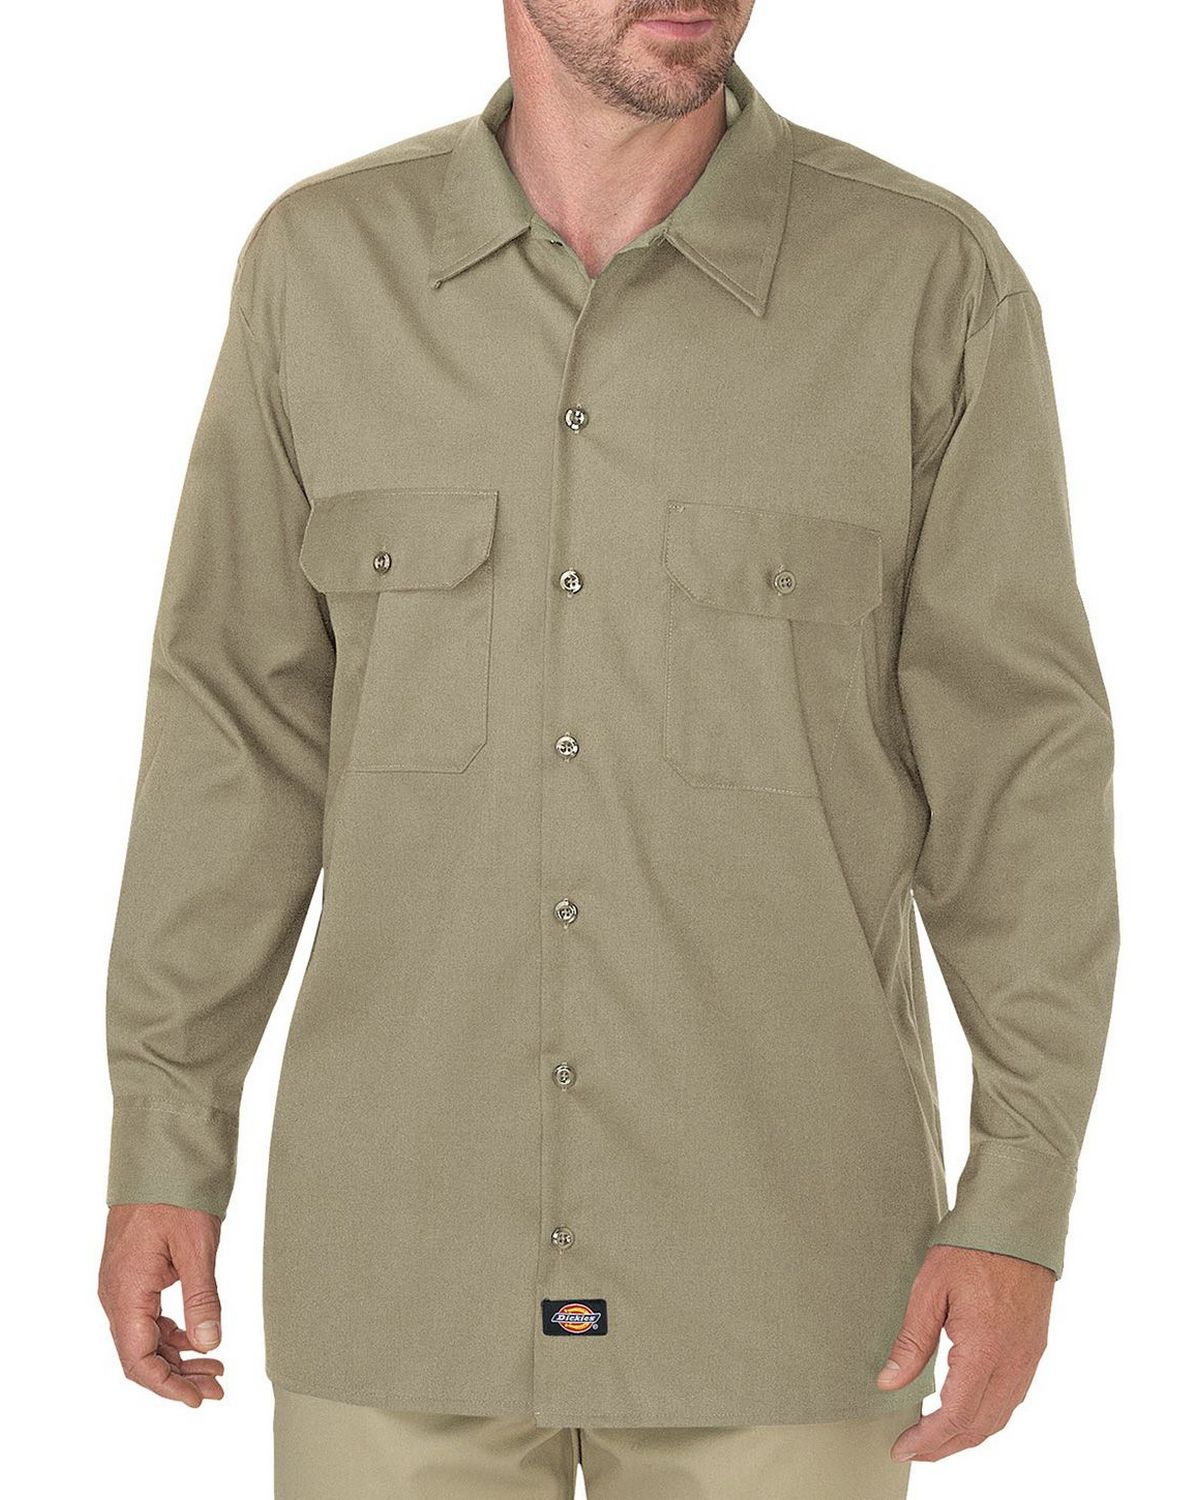 Dickies WL675 Mens FLEX Relaxed Fit Long-Sleeve Twill Work Shirt